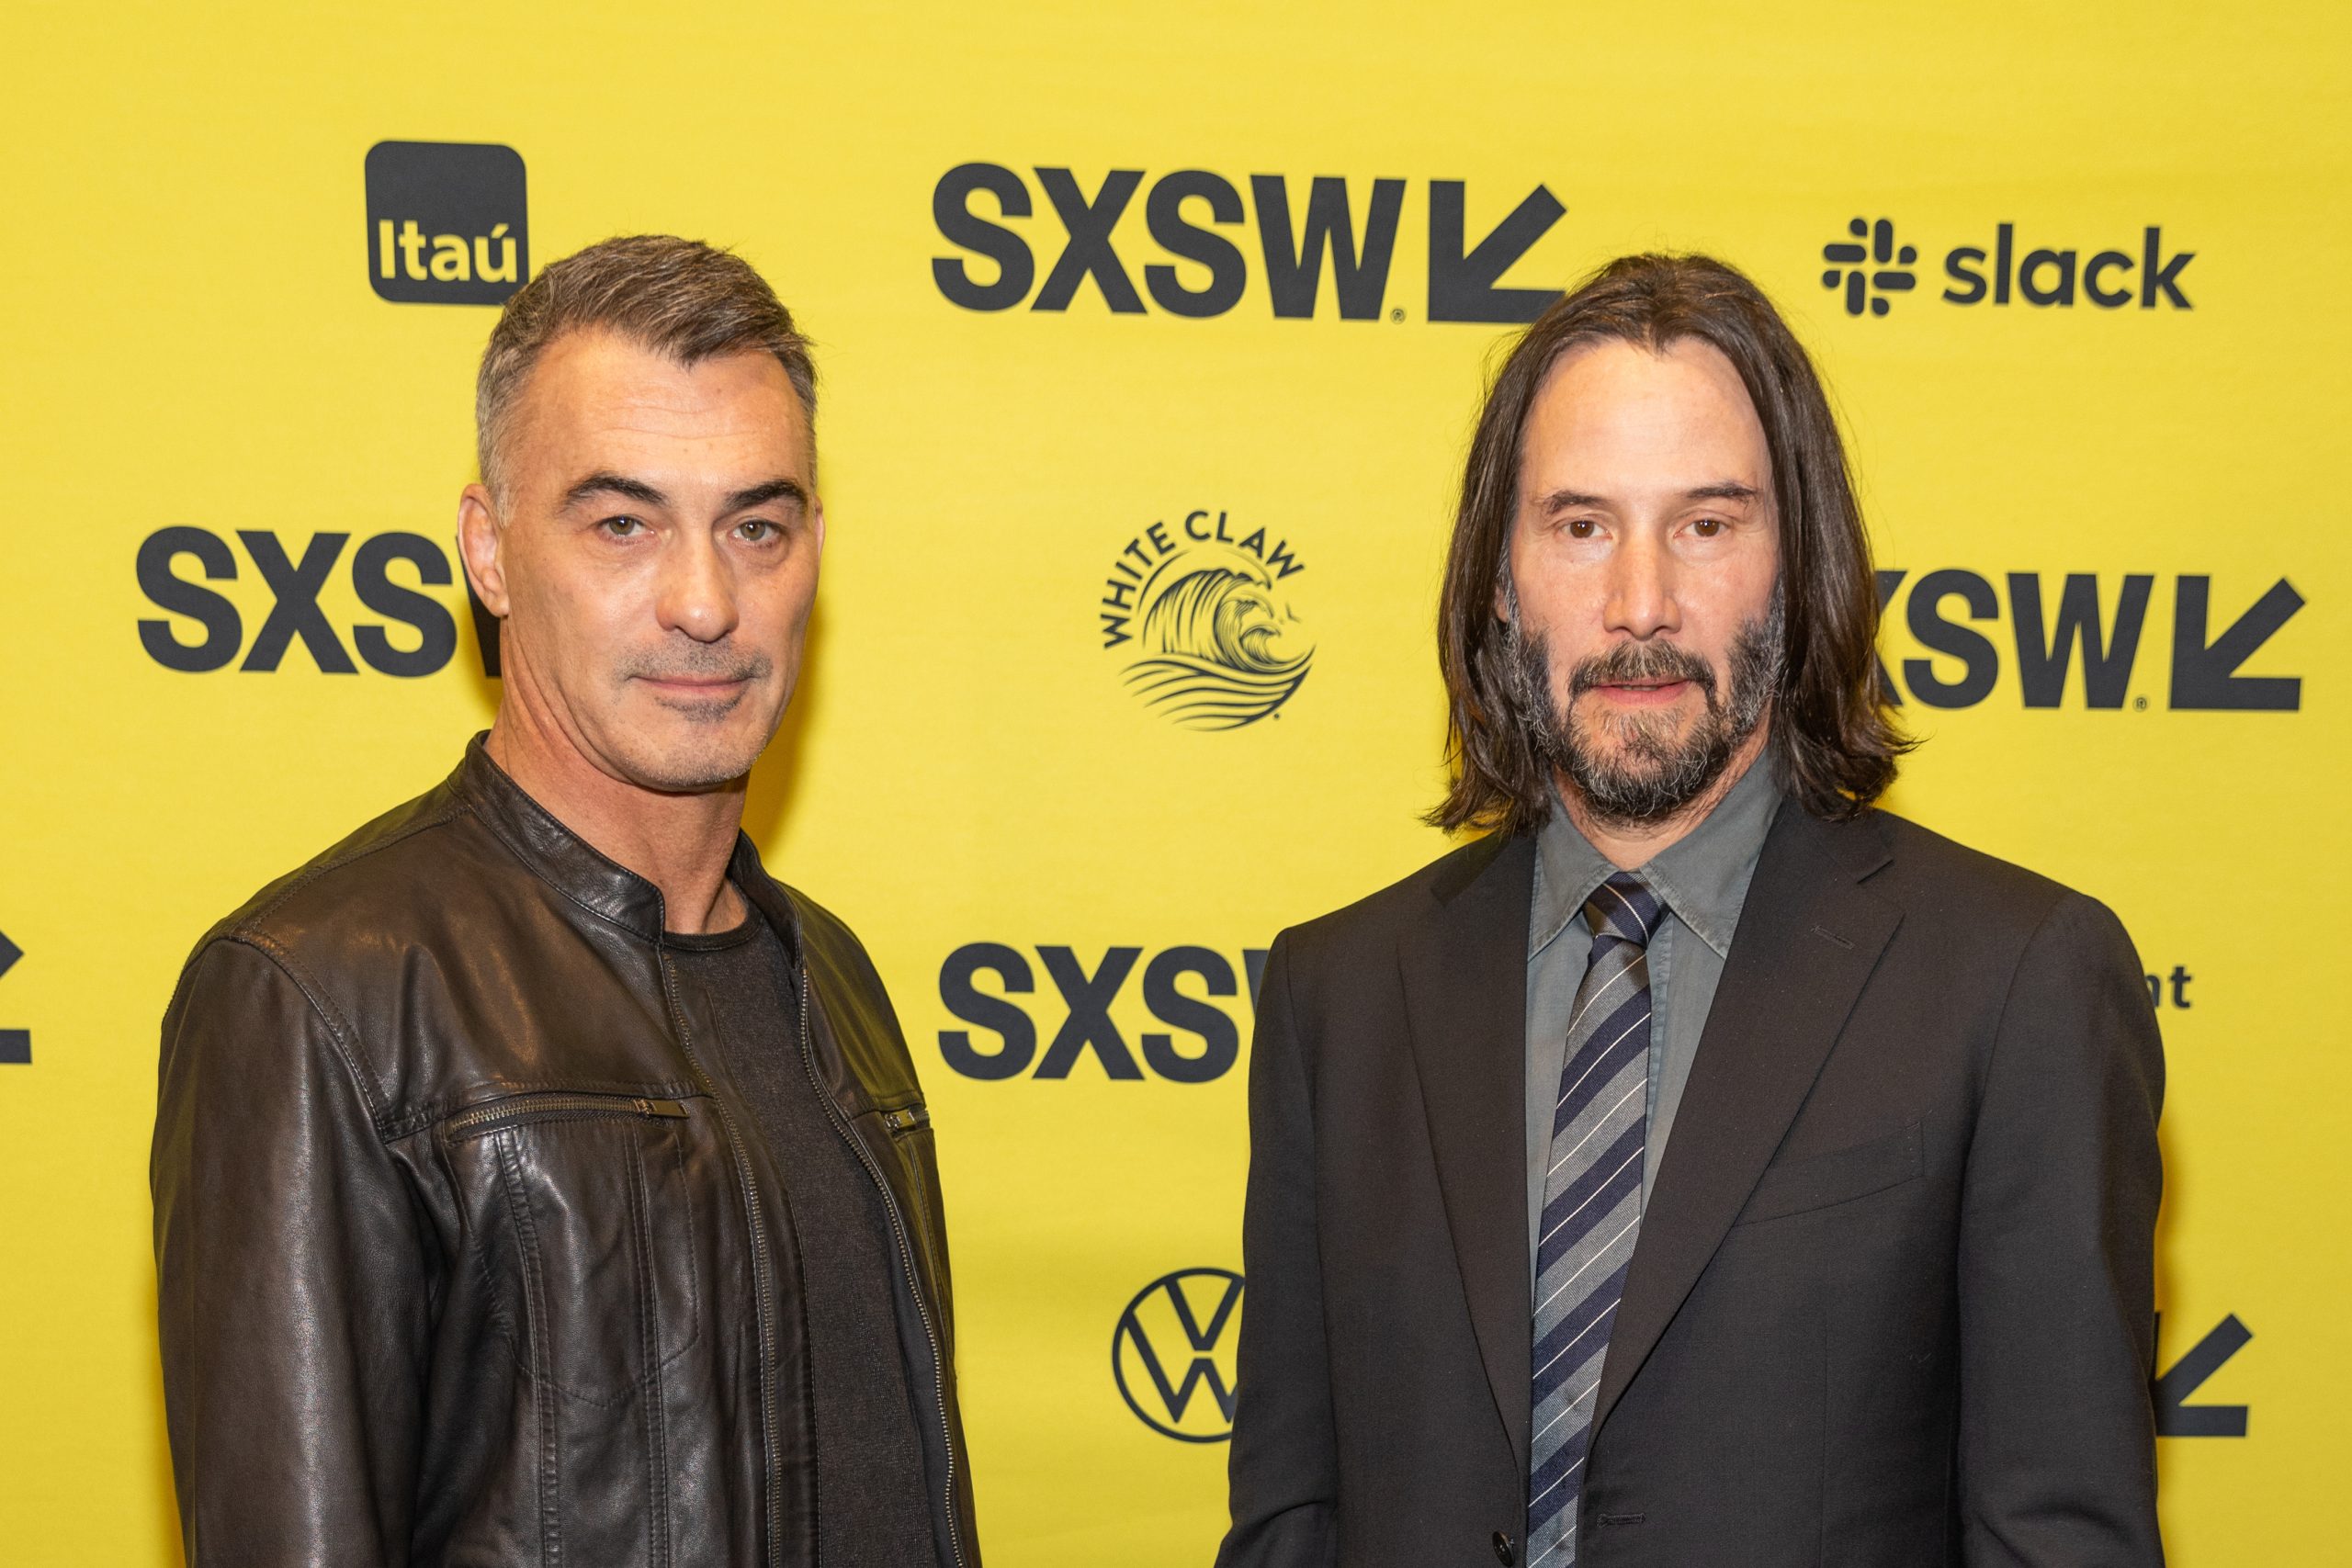 Chad Stahelski and Keanu Reeves at the SXSW 2023 in Austin, Texas